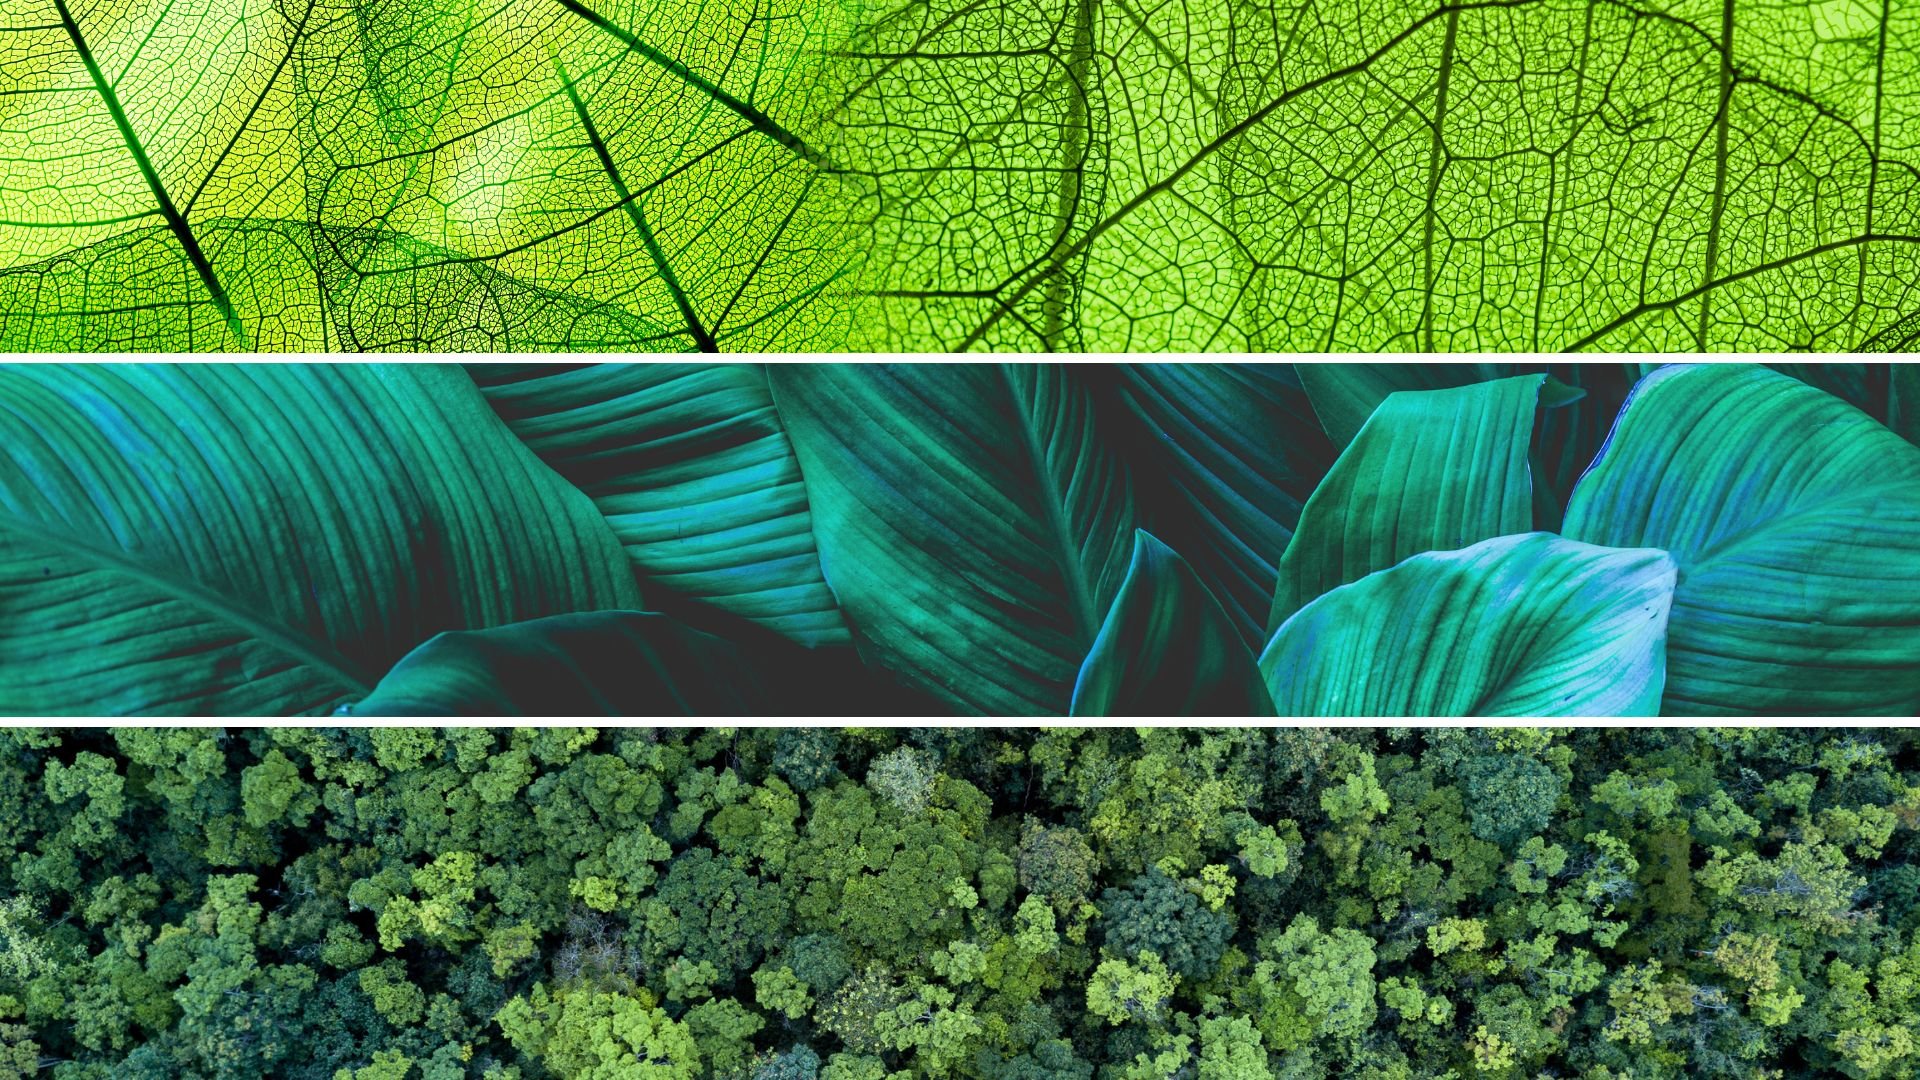 Biomimicry and Innovation